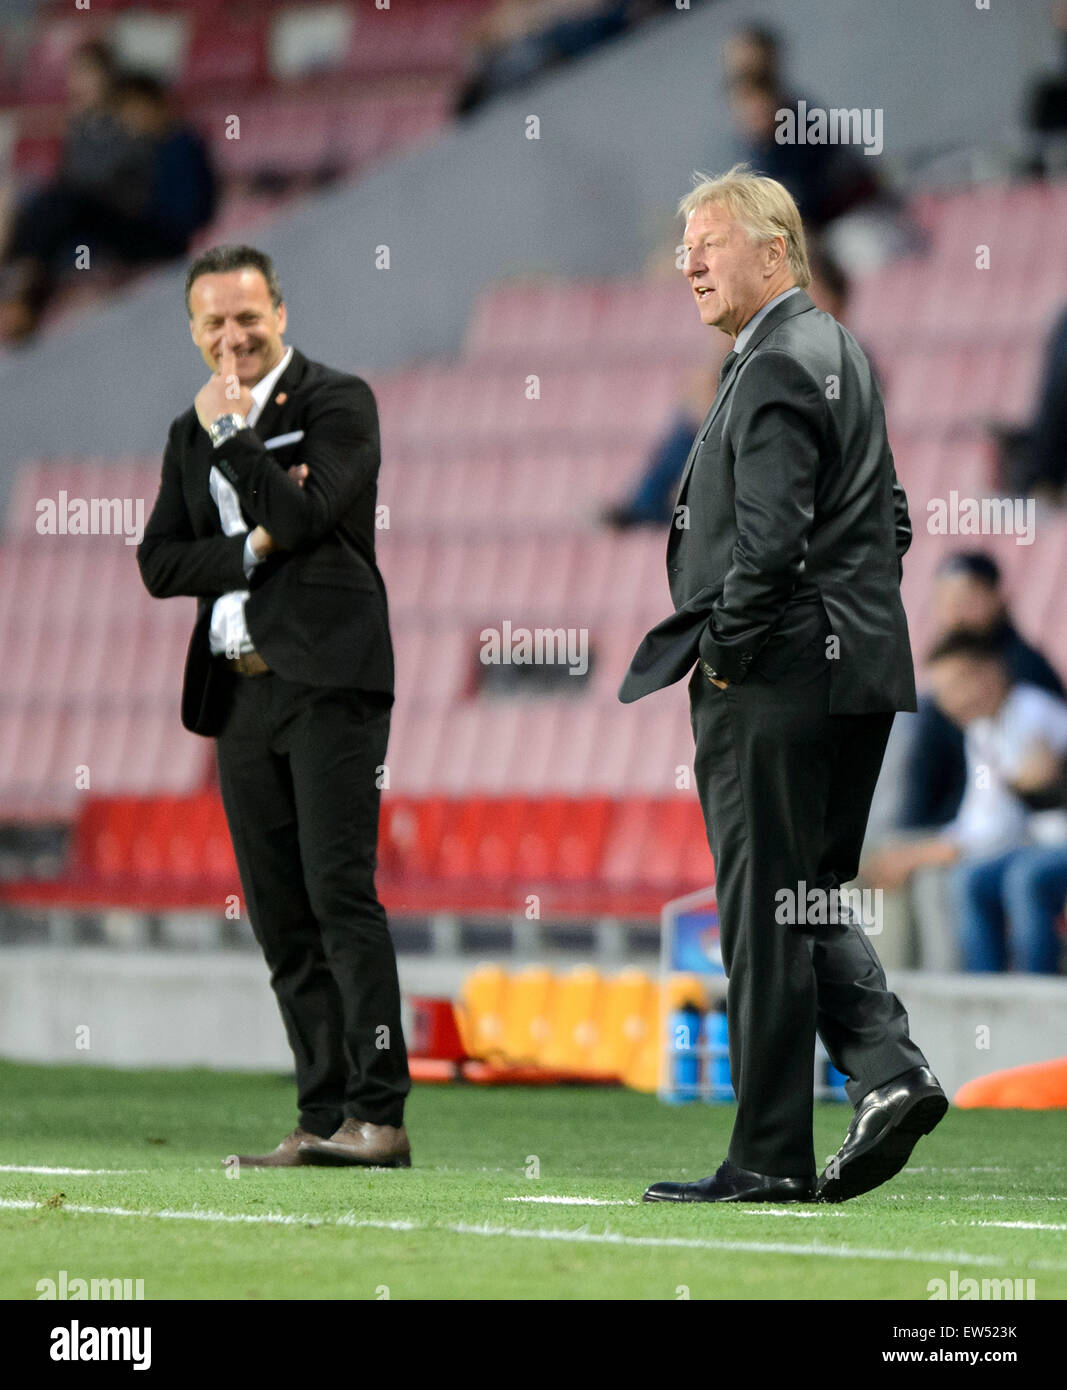 Prague, Czech Republic. 17th June, 2015. Germany's coach Horst Hrubesch (R) and Serbia's coach Mladen Dodic at the touchline during the UEFA Under-21 European Championships 2015 group A soccer match between Germany and Serbia at Letna Stadium in Prague, C Stock Photo